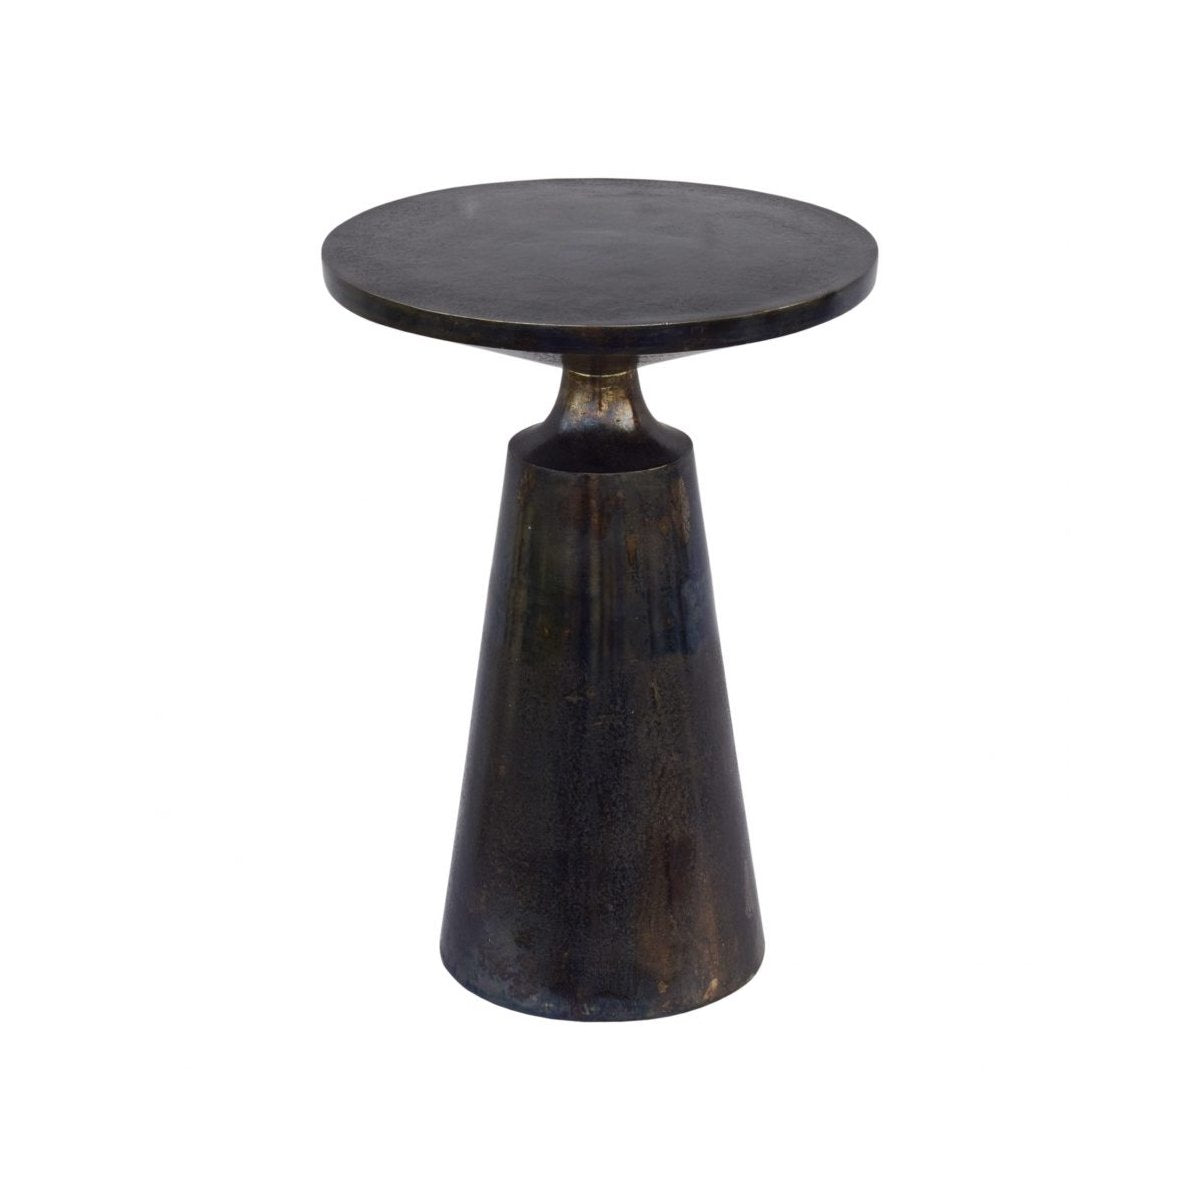 Load image into Gallery viewer, Sonja Accent Table Accent Tables Moe&amp;#39;s     Four Hands, Burke Decor, Mid Century Modern Furniture, Old Bones Furniture Company, Old Bones Co, Modern Mid Century, Designer Furniture, https://www.oldbonesco.com/
